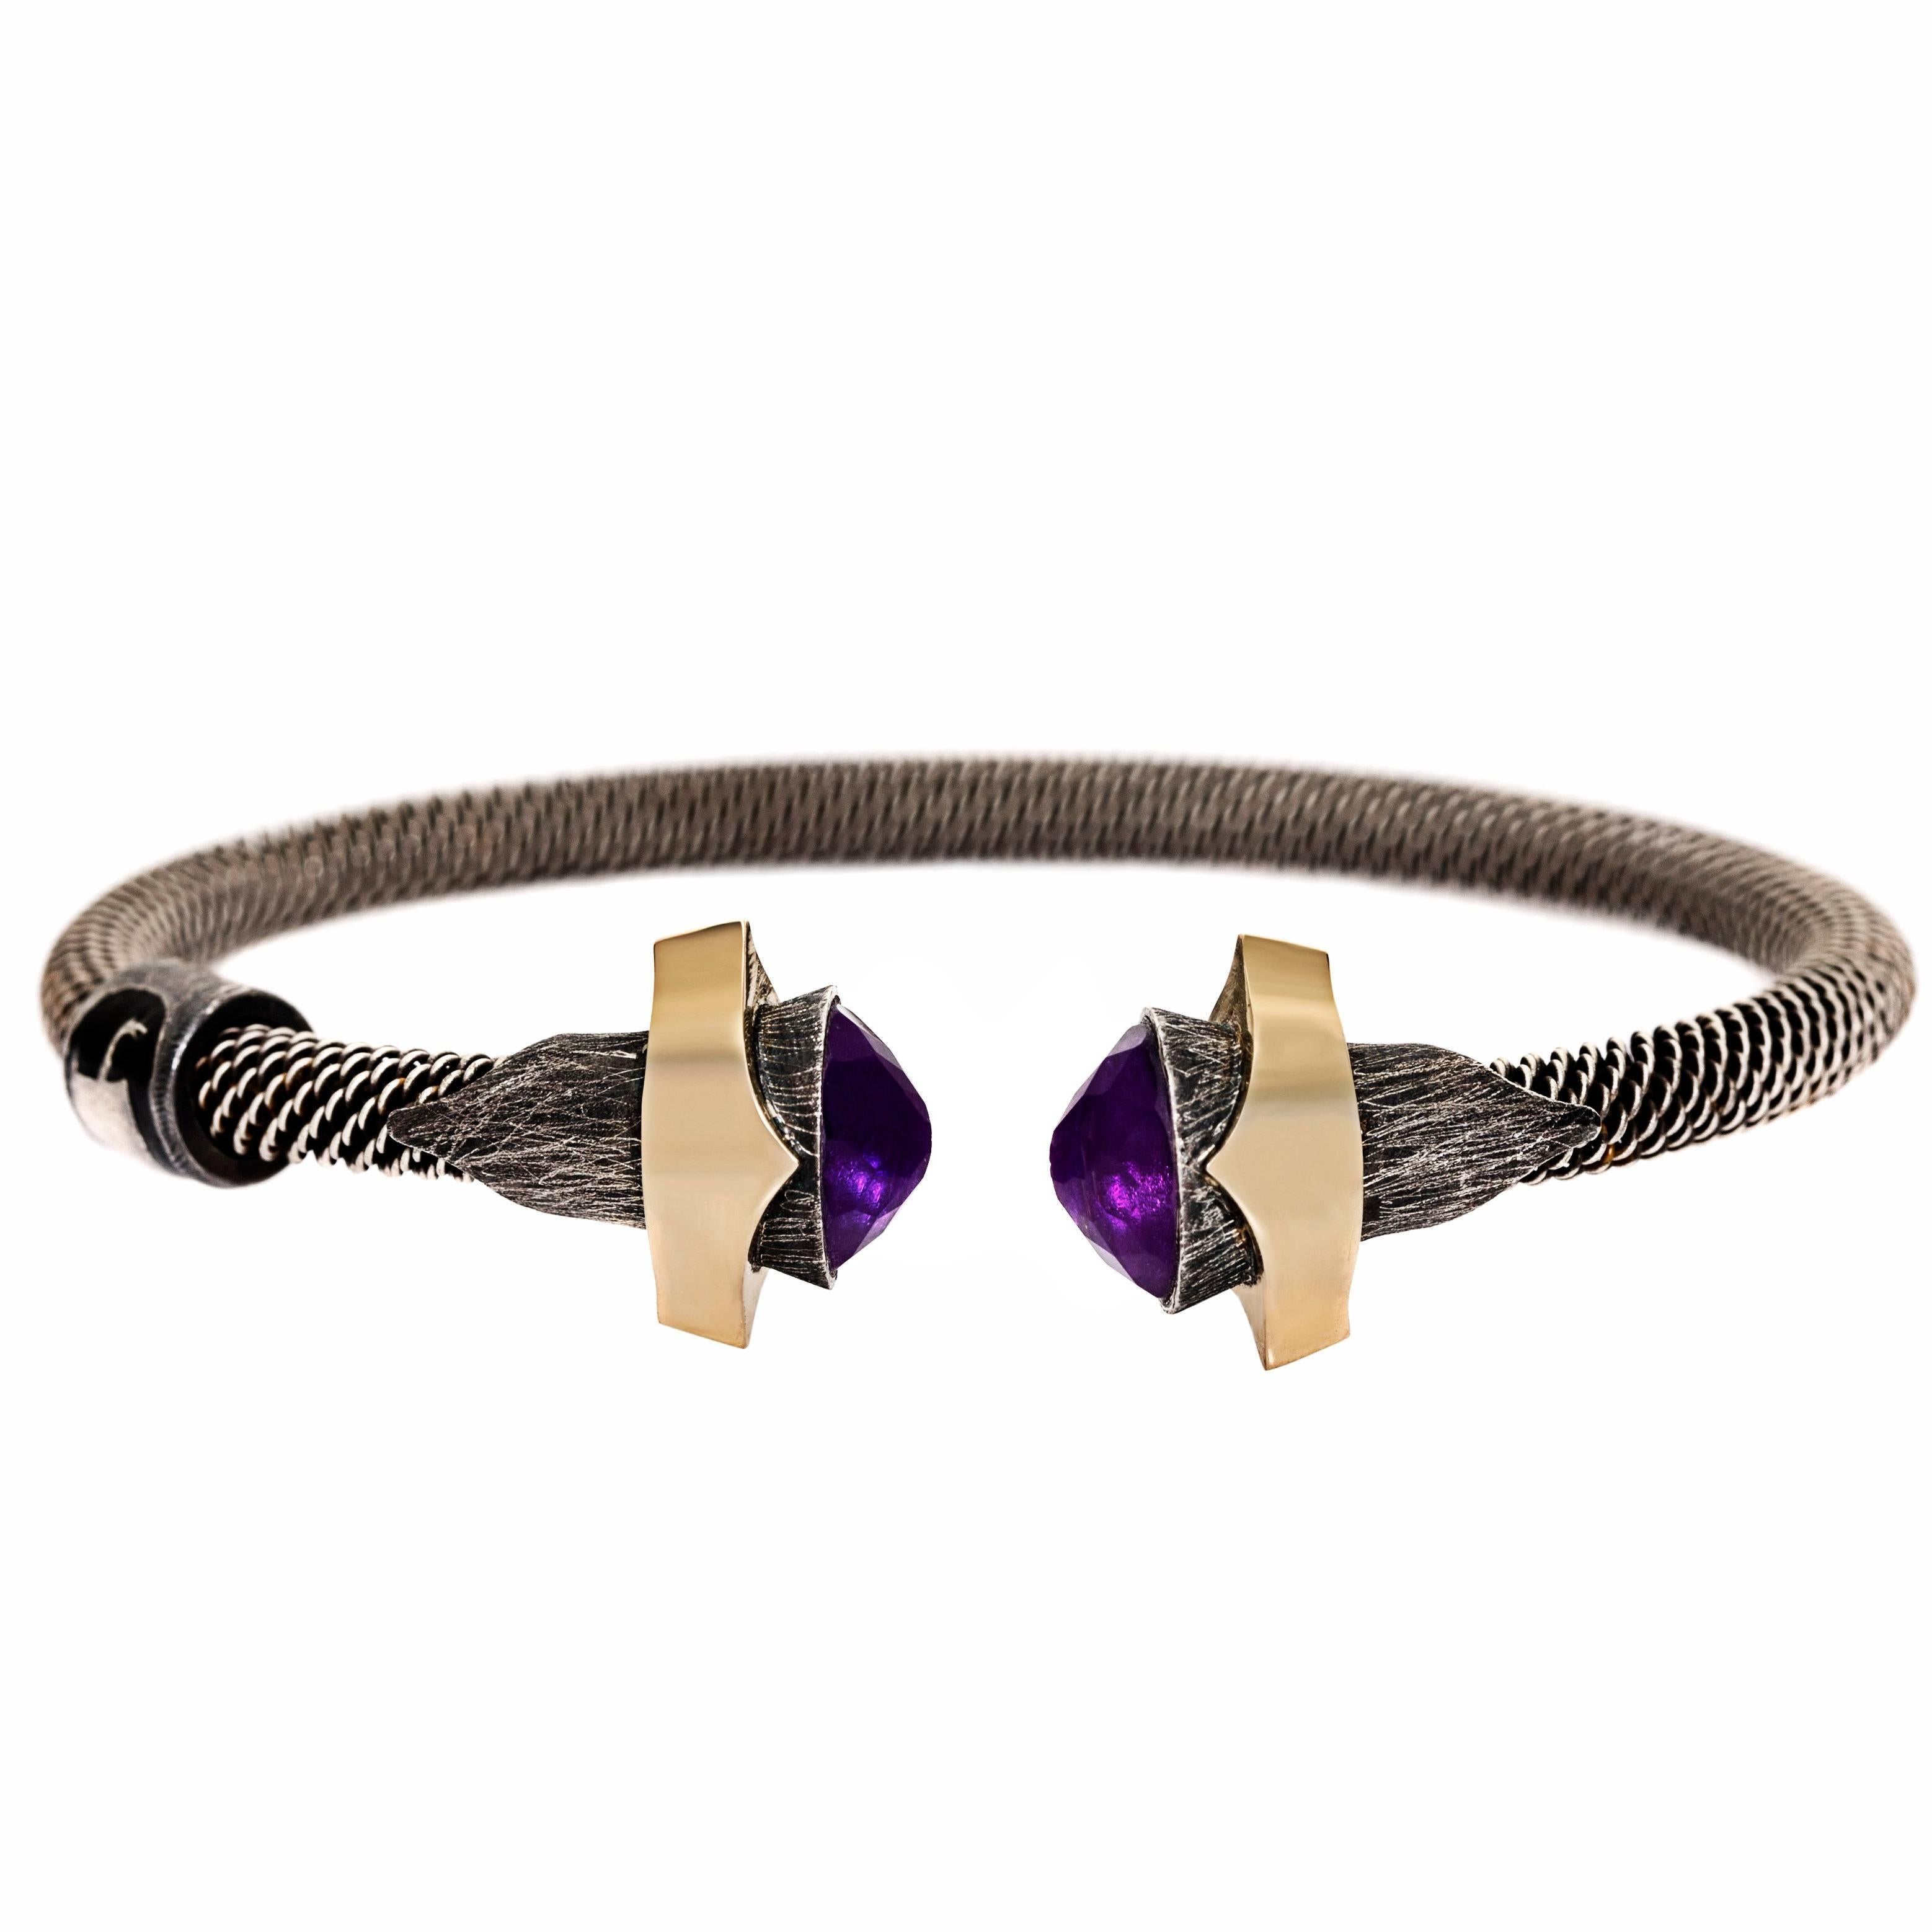 Amethyst Bracelet with Rose Gold and Silver Details For Sale